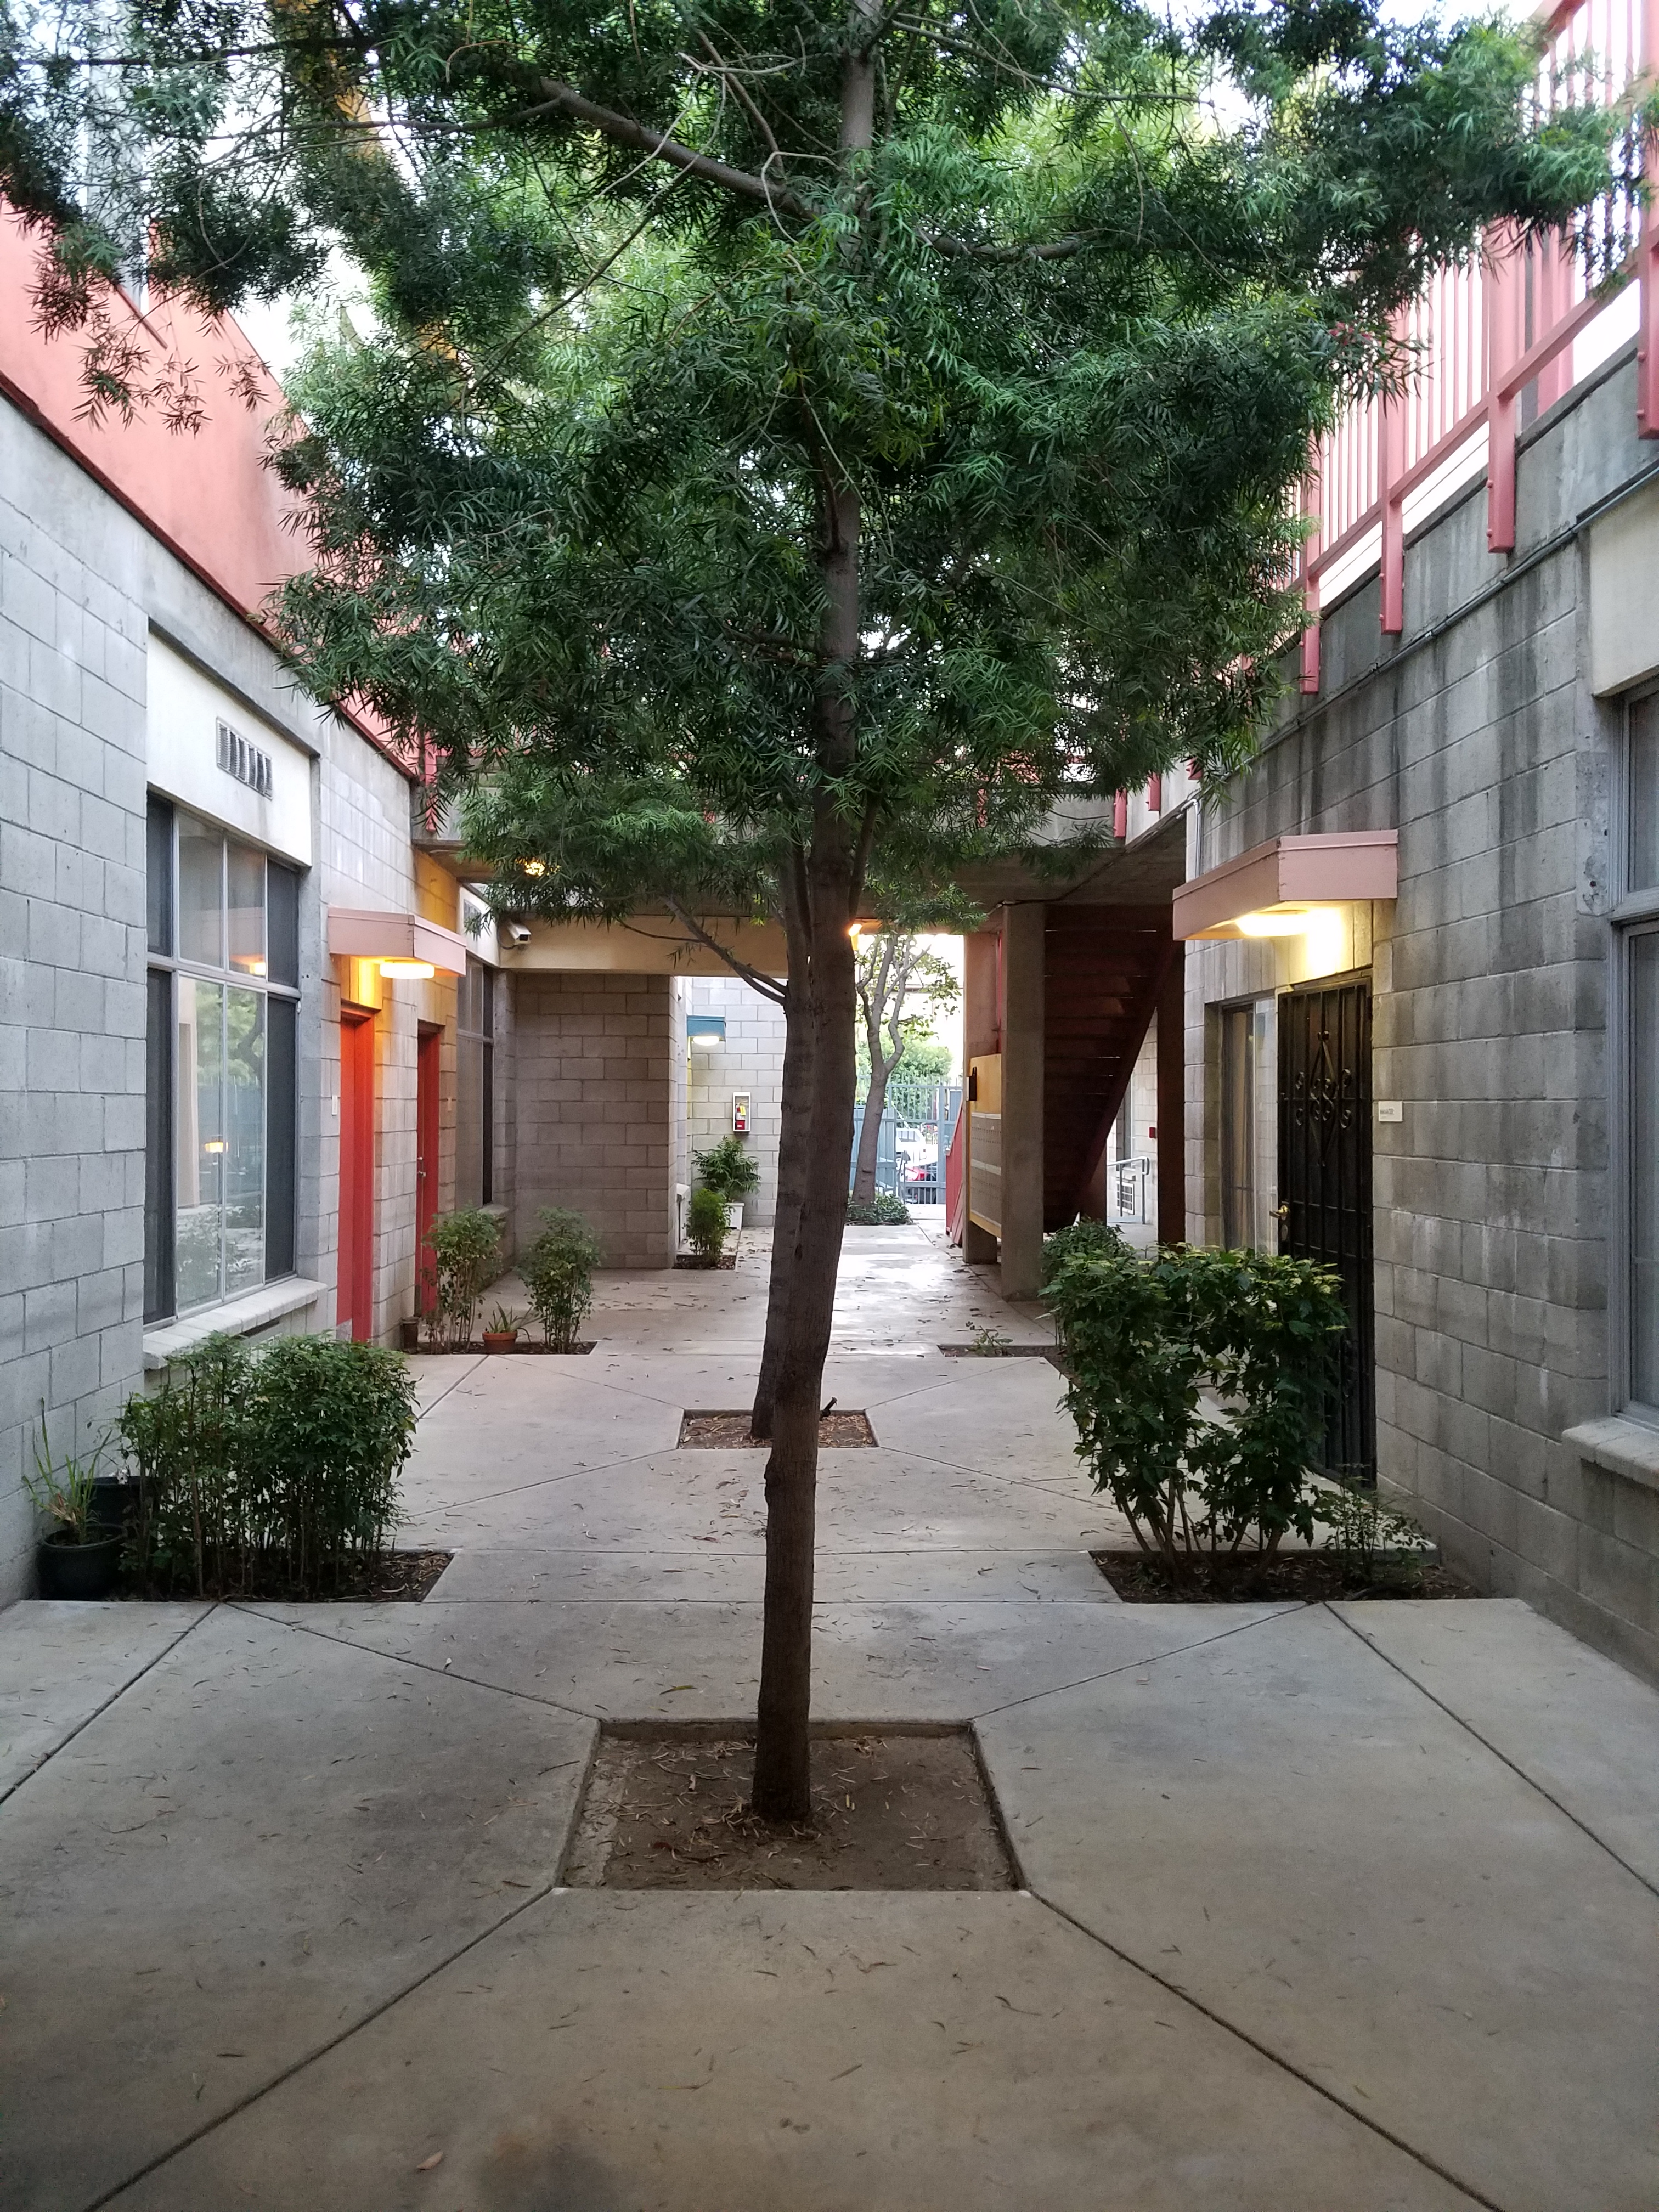 Parthenia court courtyard. Small sections of plants and trees in the center and sides of the walkway